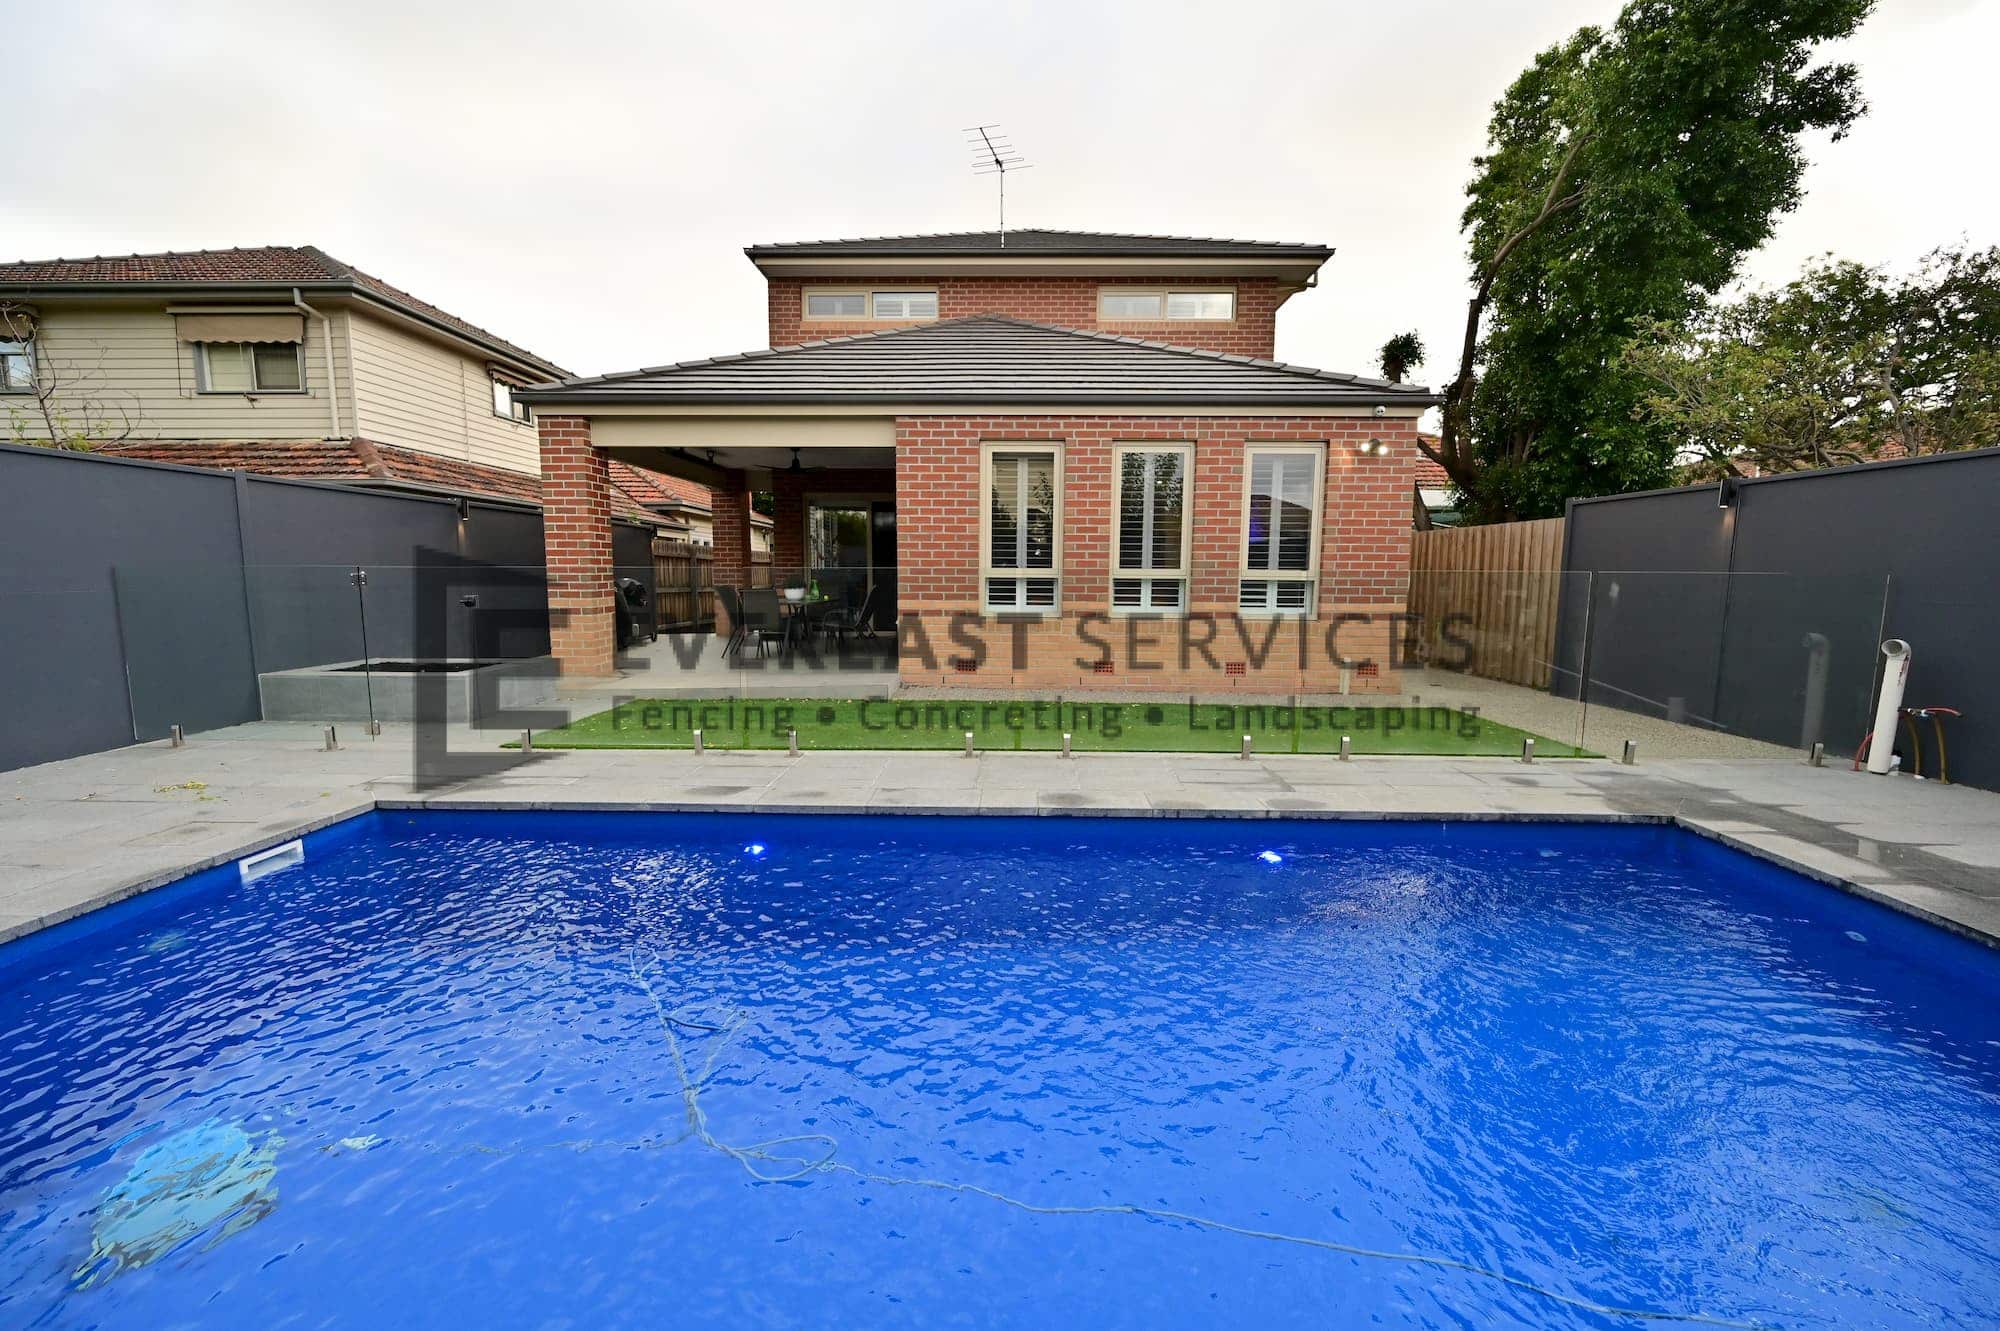 L284 - Yarraville - Backyard Landscaping with Glass Pool Fence looking directly at the house